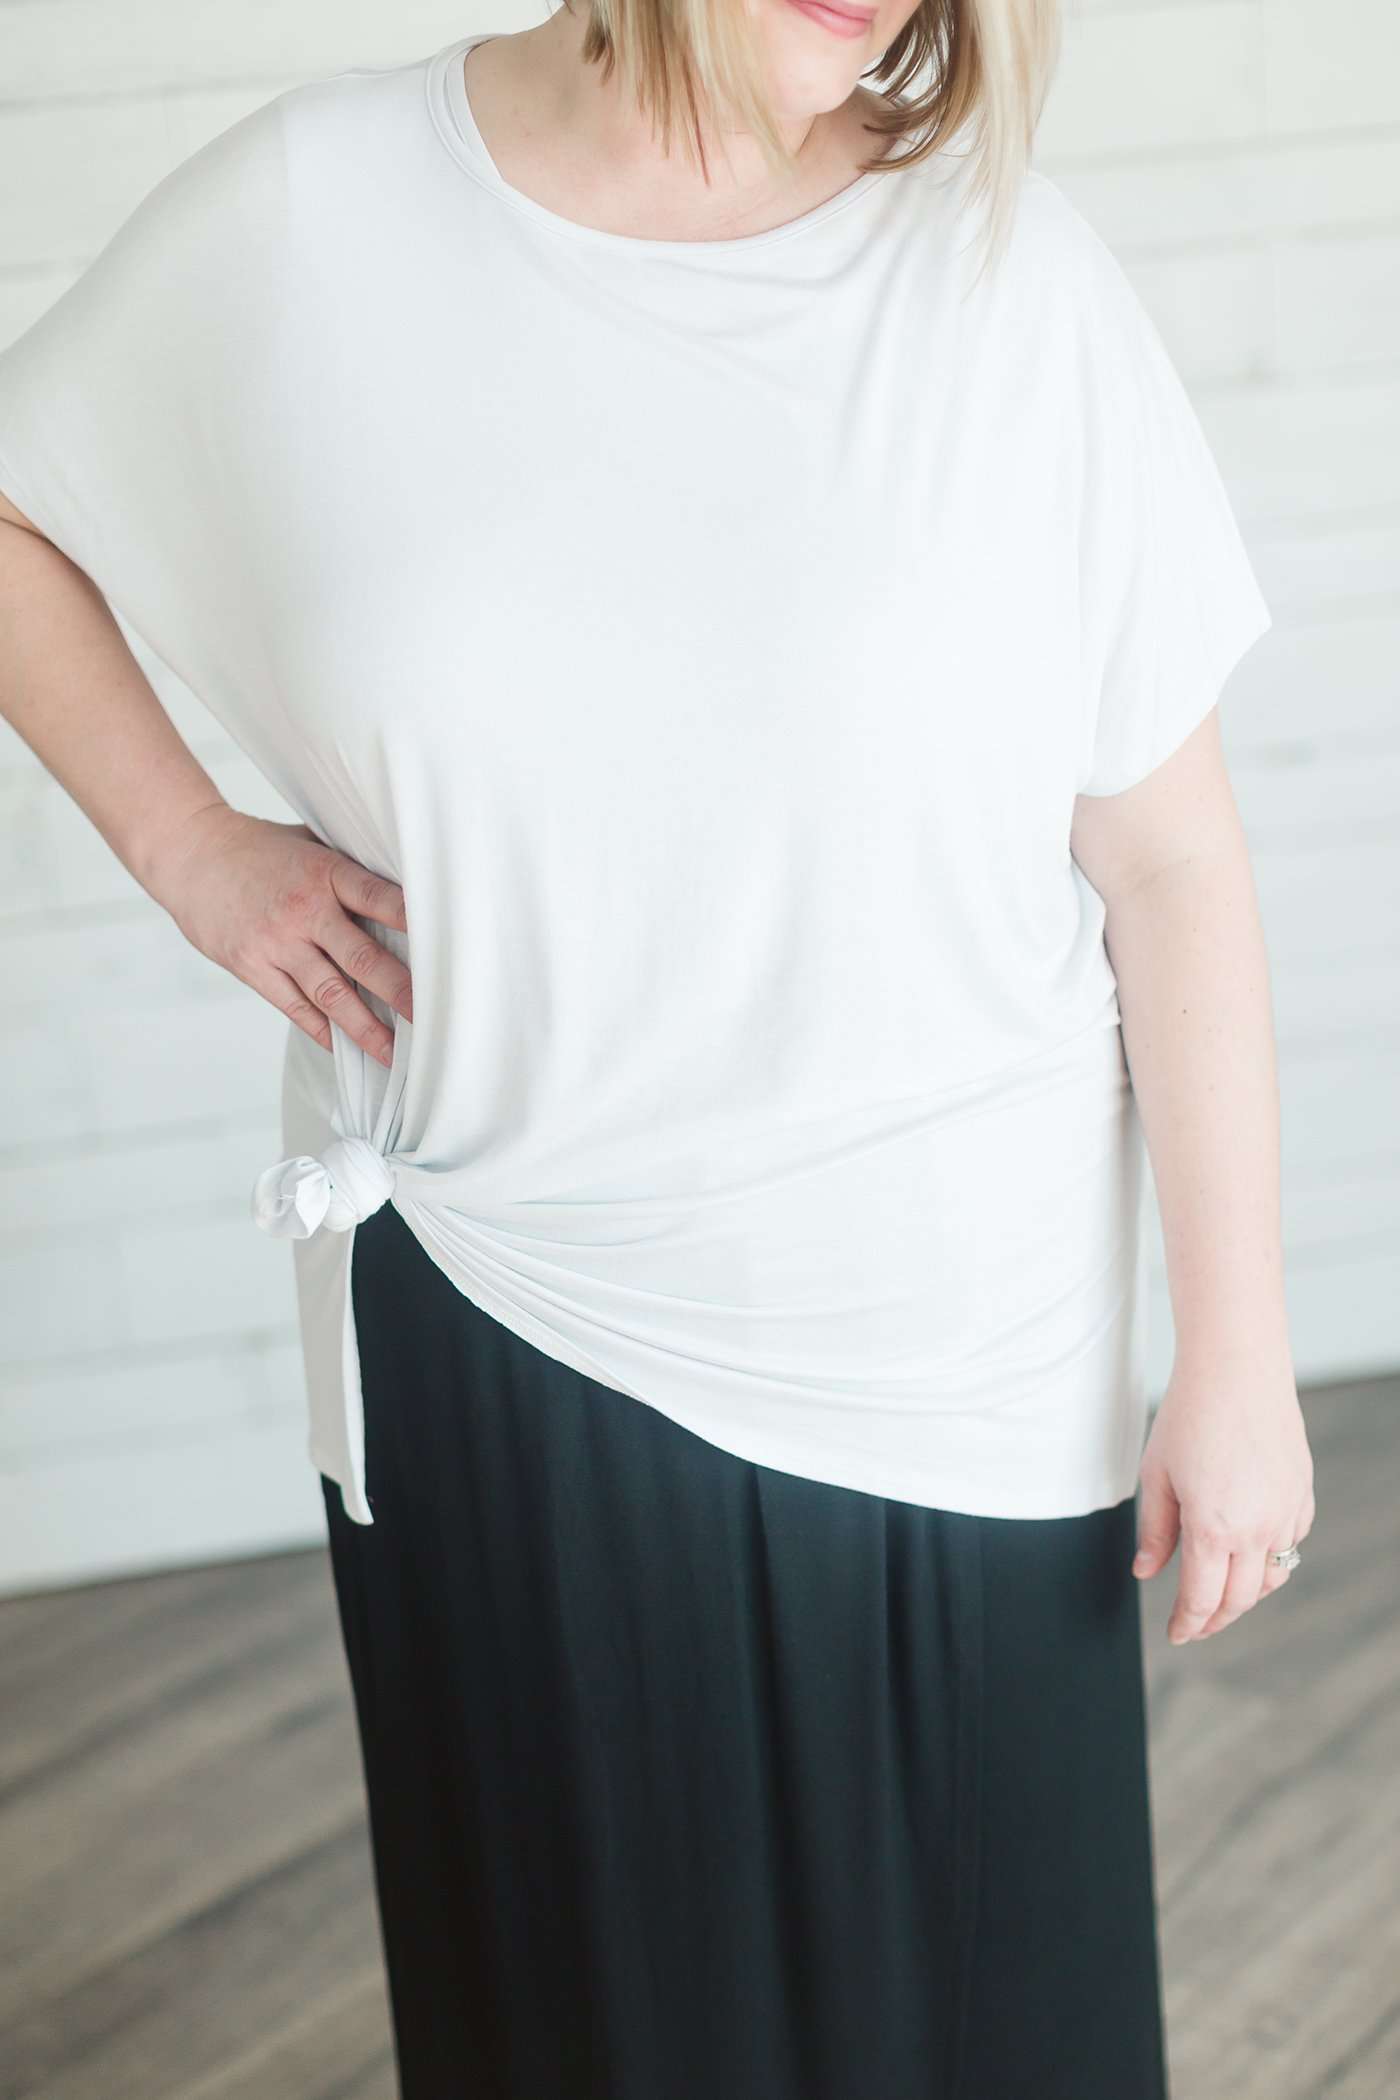 Relaxed Fit Drape Tee - FINAL SALE Tops